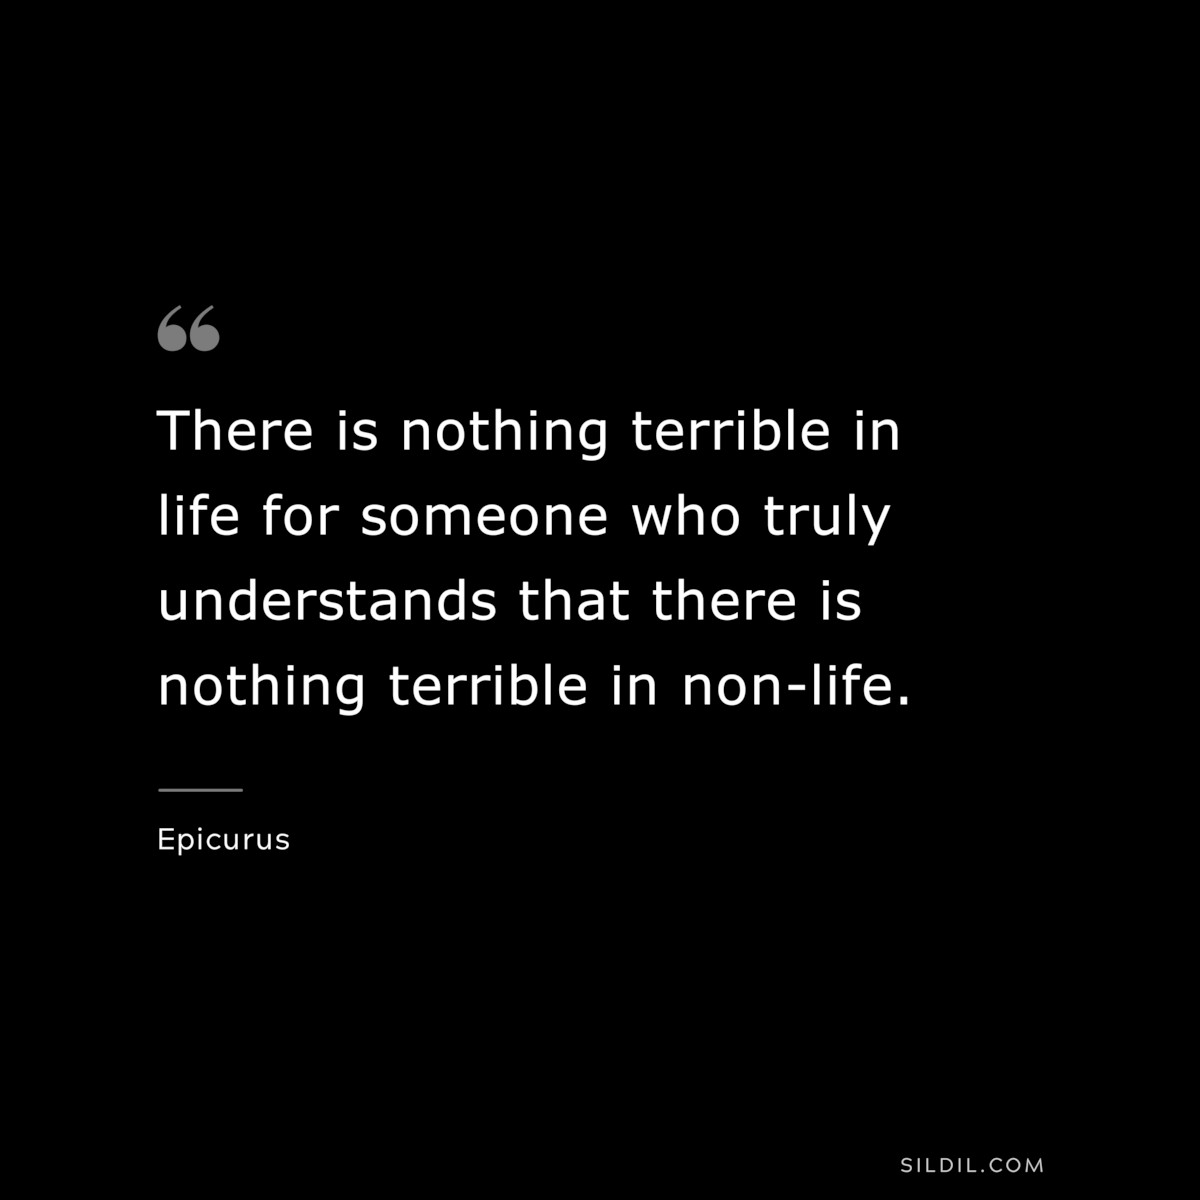 There is nothing terrible in life for someone who truly understands that there is nothing terrible in non-life. — Epicurus